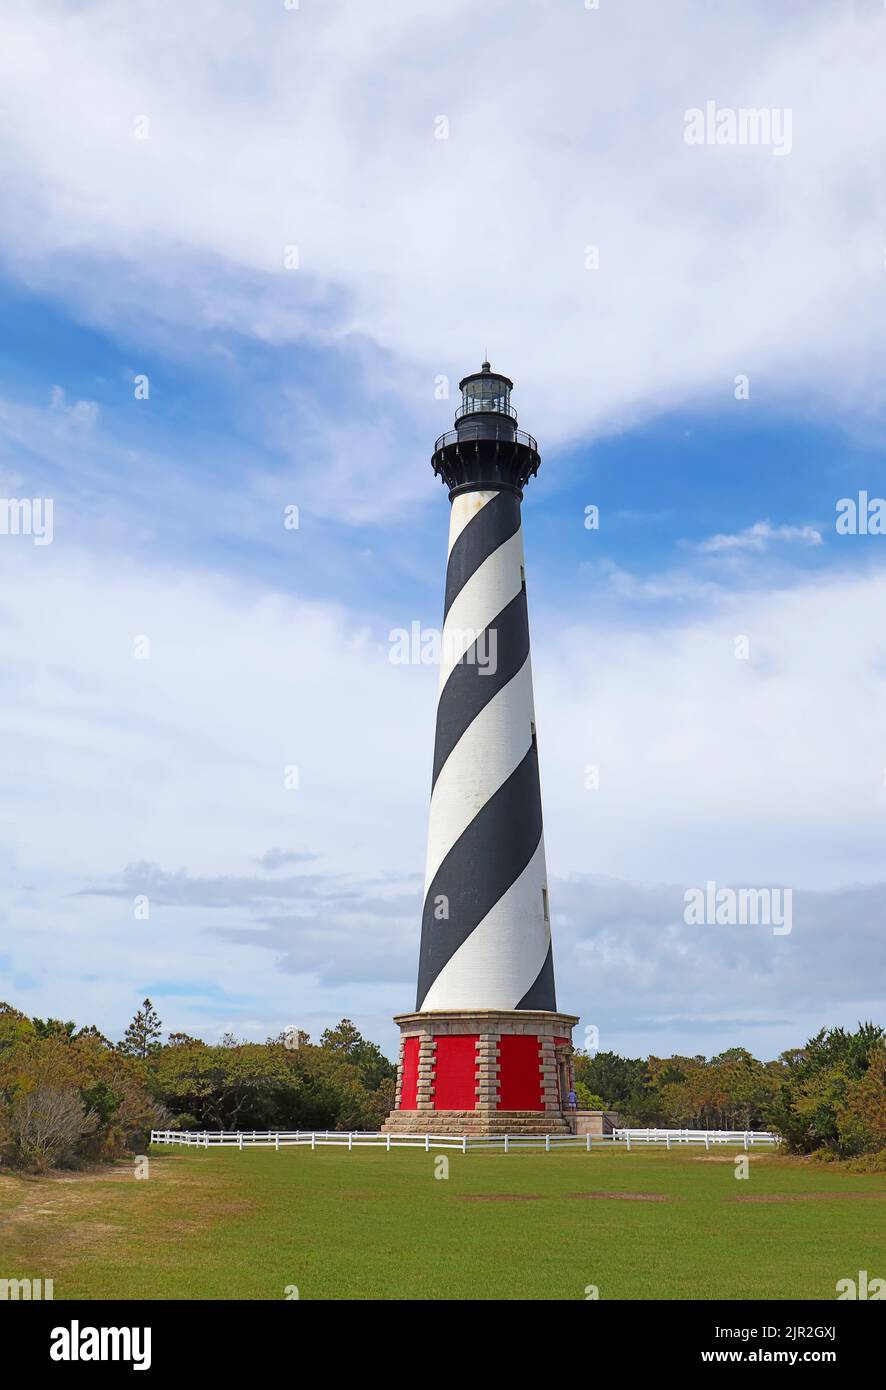 The Cape Hatteras lighthouse tower near the town of Buxton on the Outer Banks of North Carolina vertical Stock Photo